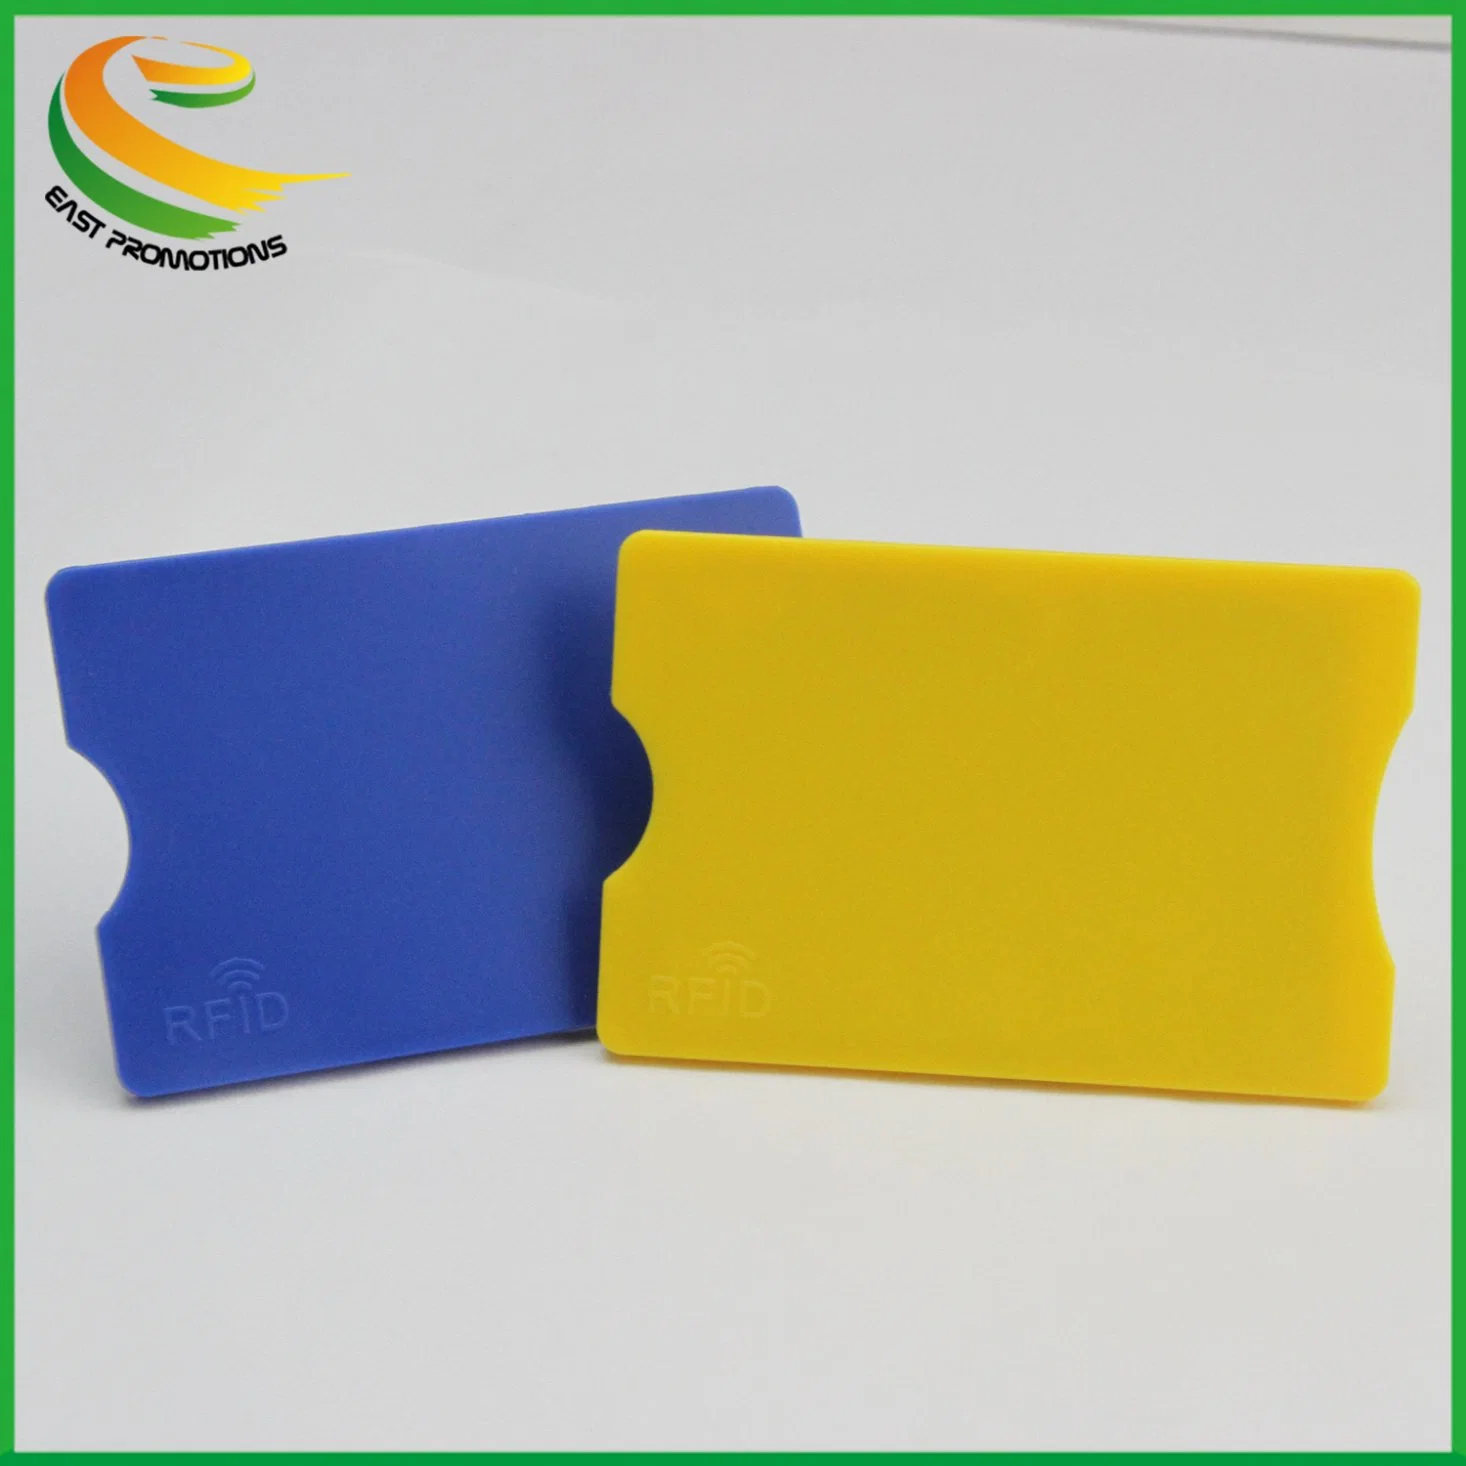 Plastic RFID Shield Sleeve Blocking Card for IC/ID/Credit Card/Passport Card Protection